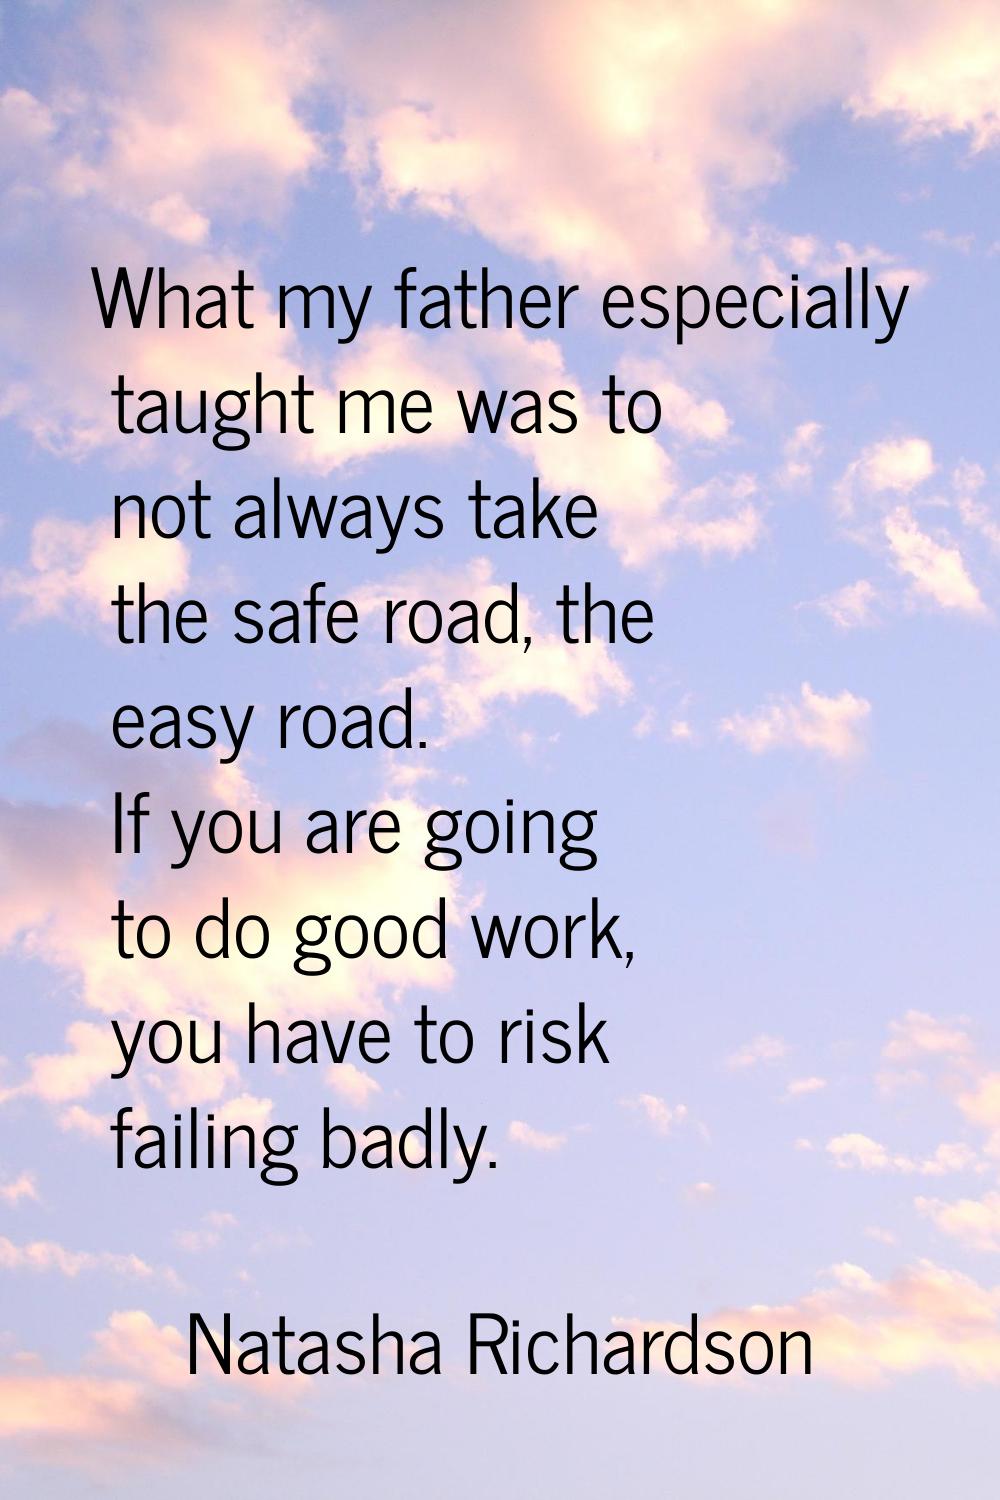 What my father especially taught me was to not always take the safe road, the easy road. If you are